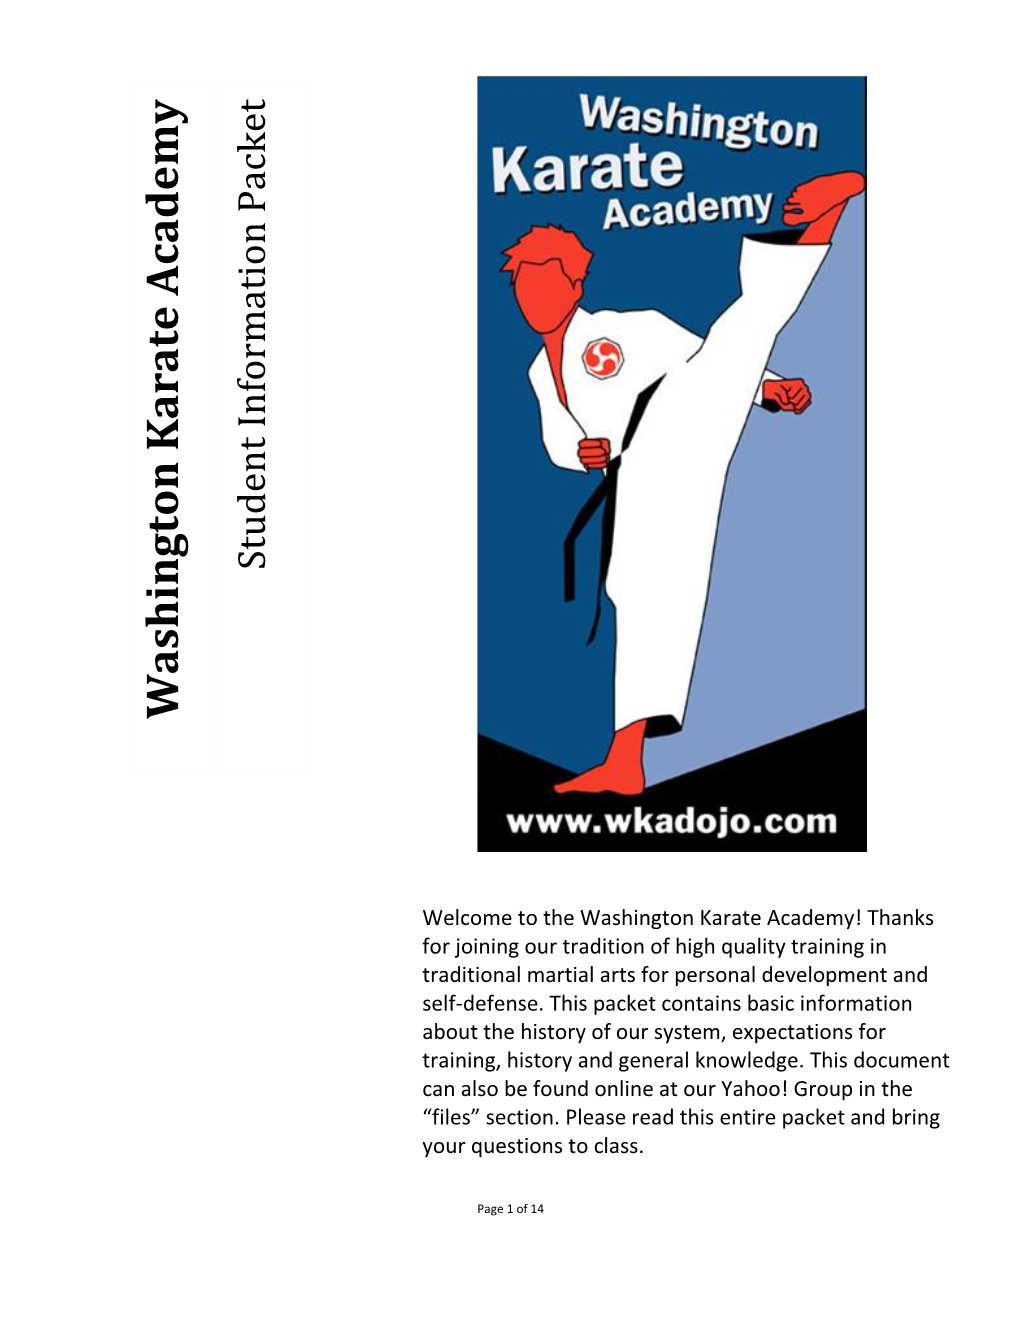 Washington Karate Academy! Thanks for Joining Our Tradition of High Quality Training in Traditional Martial Arts for Personal Development and Self-Defense